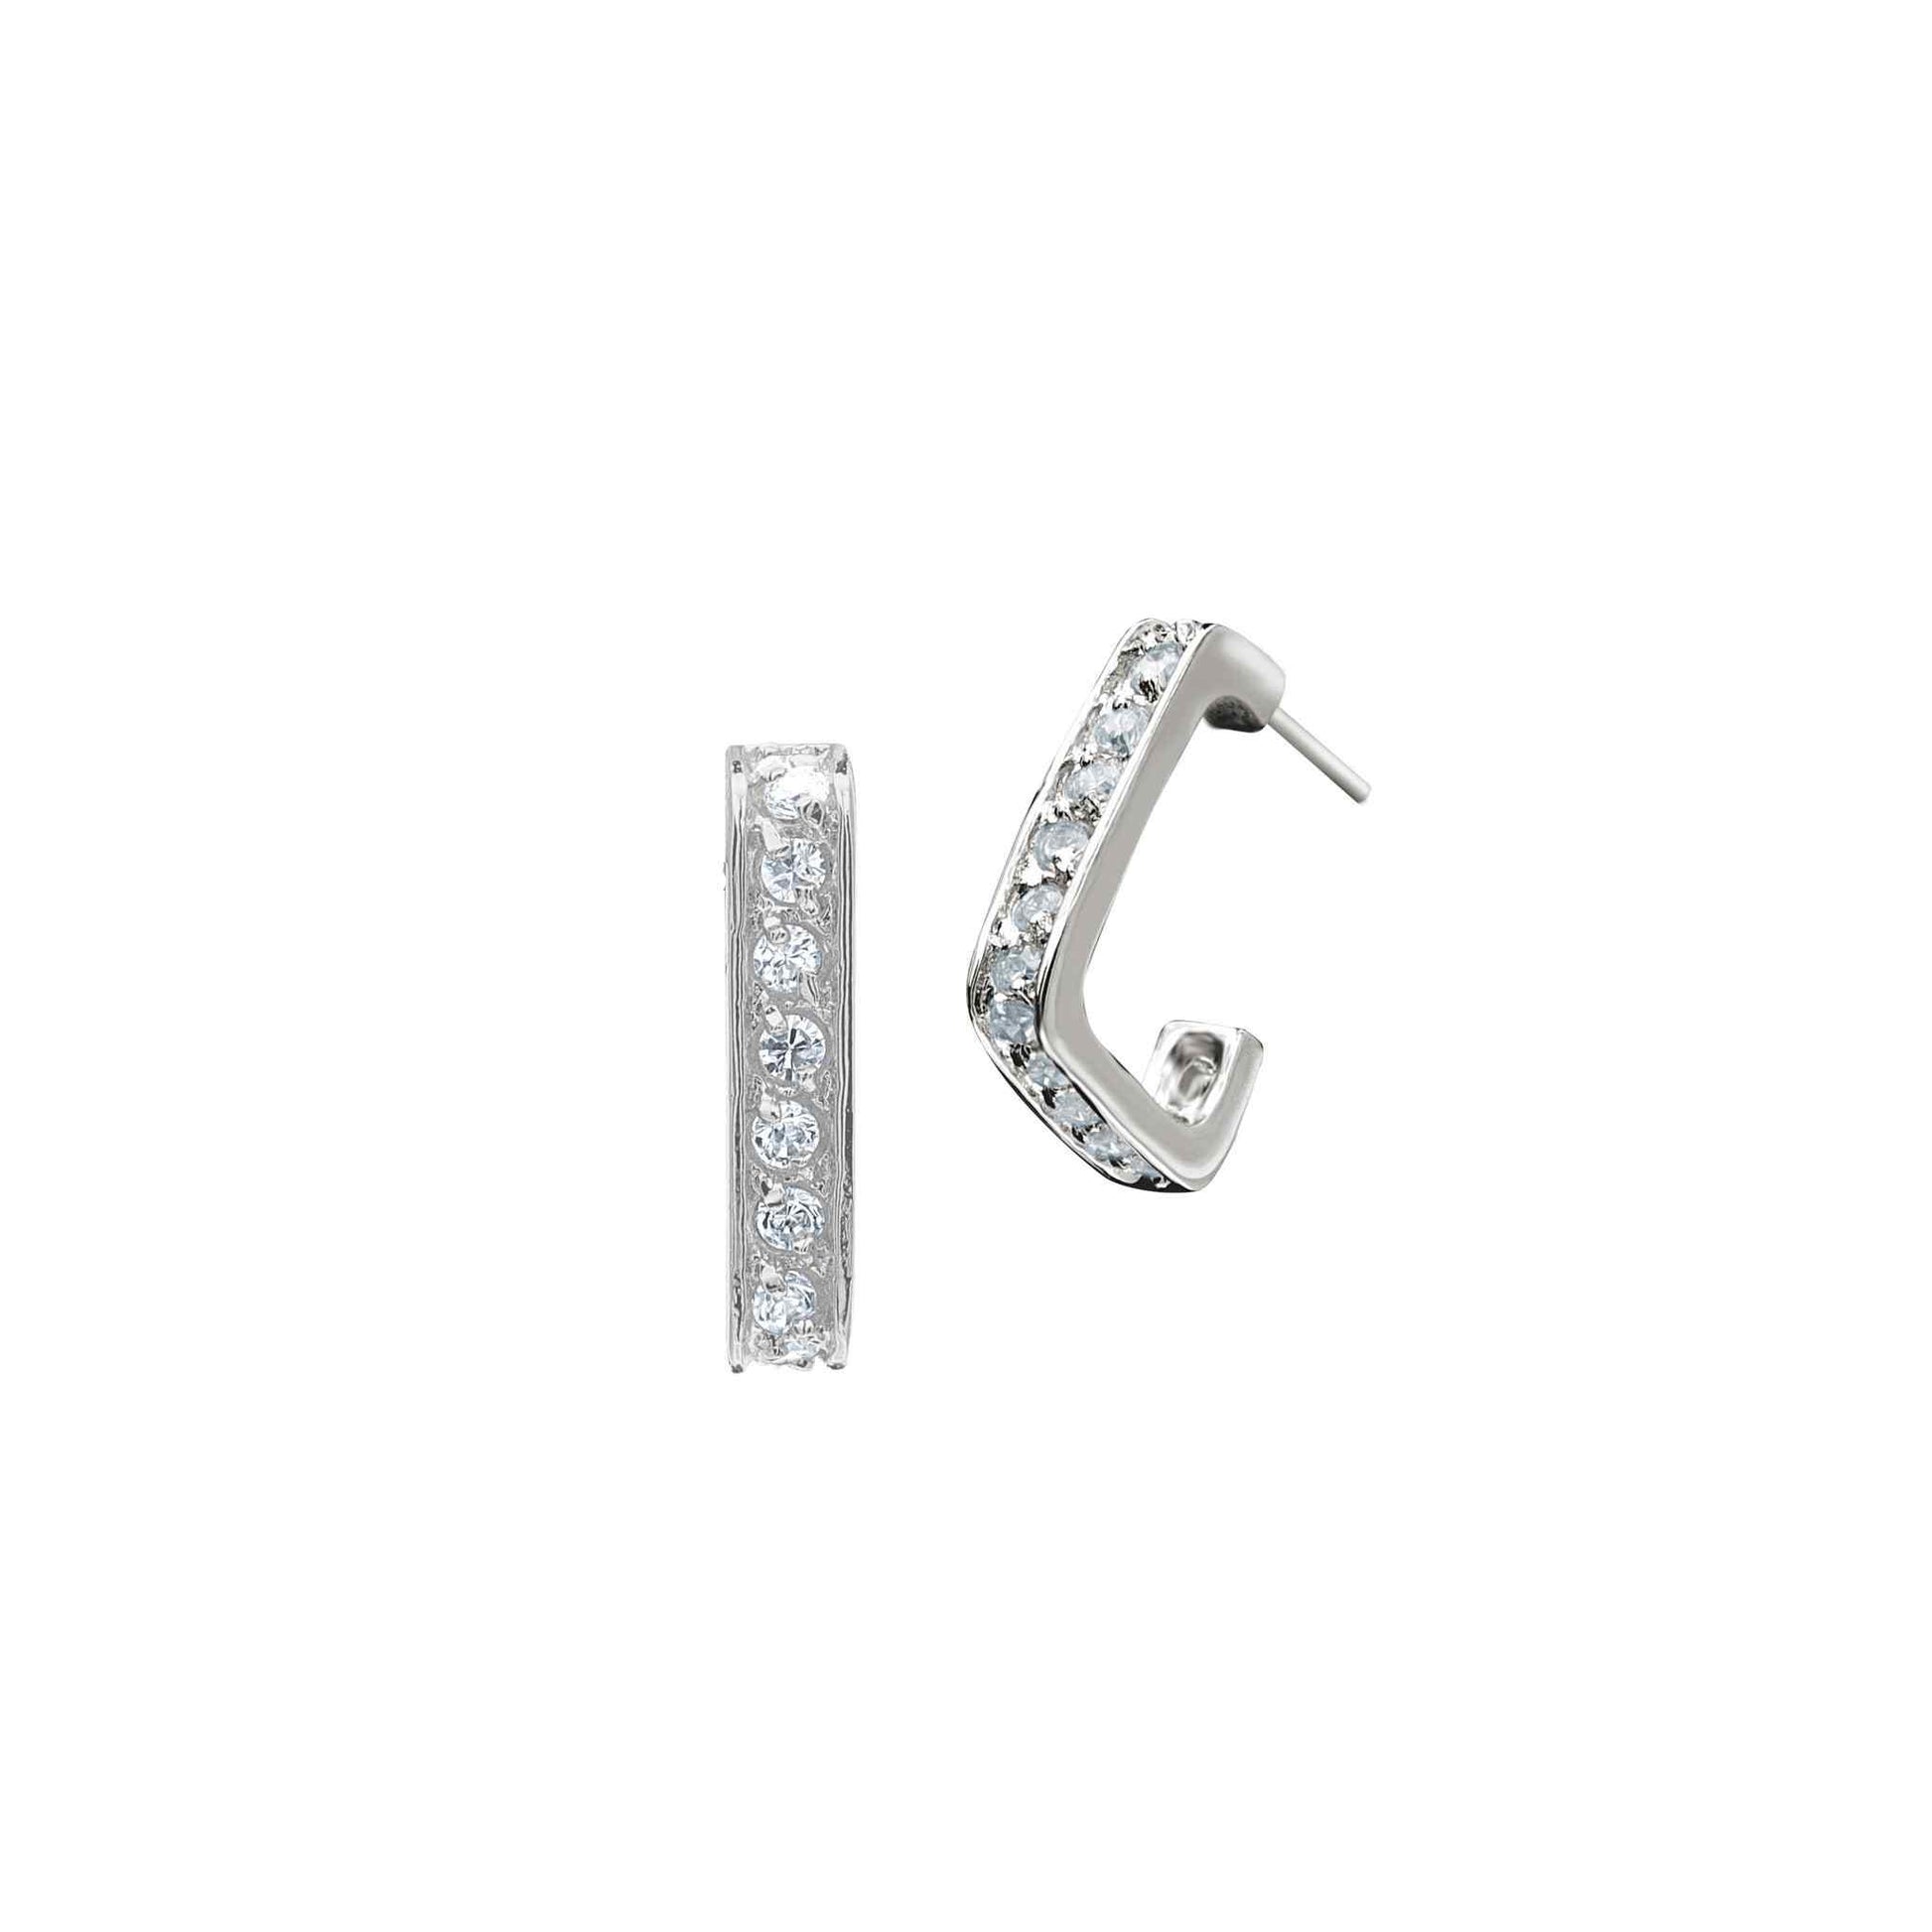 A square simulated diamond hoop earrings displayed on a neutral white background.